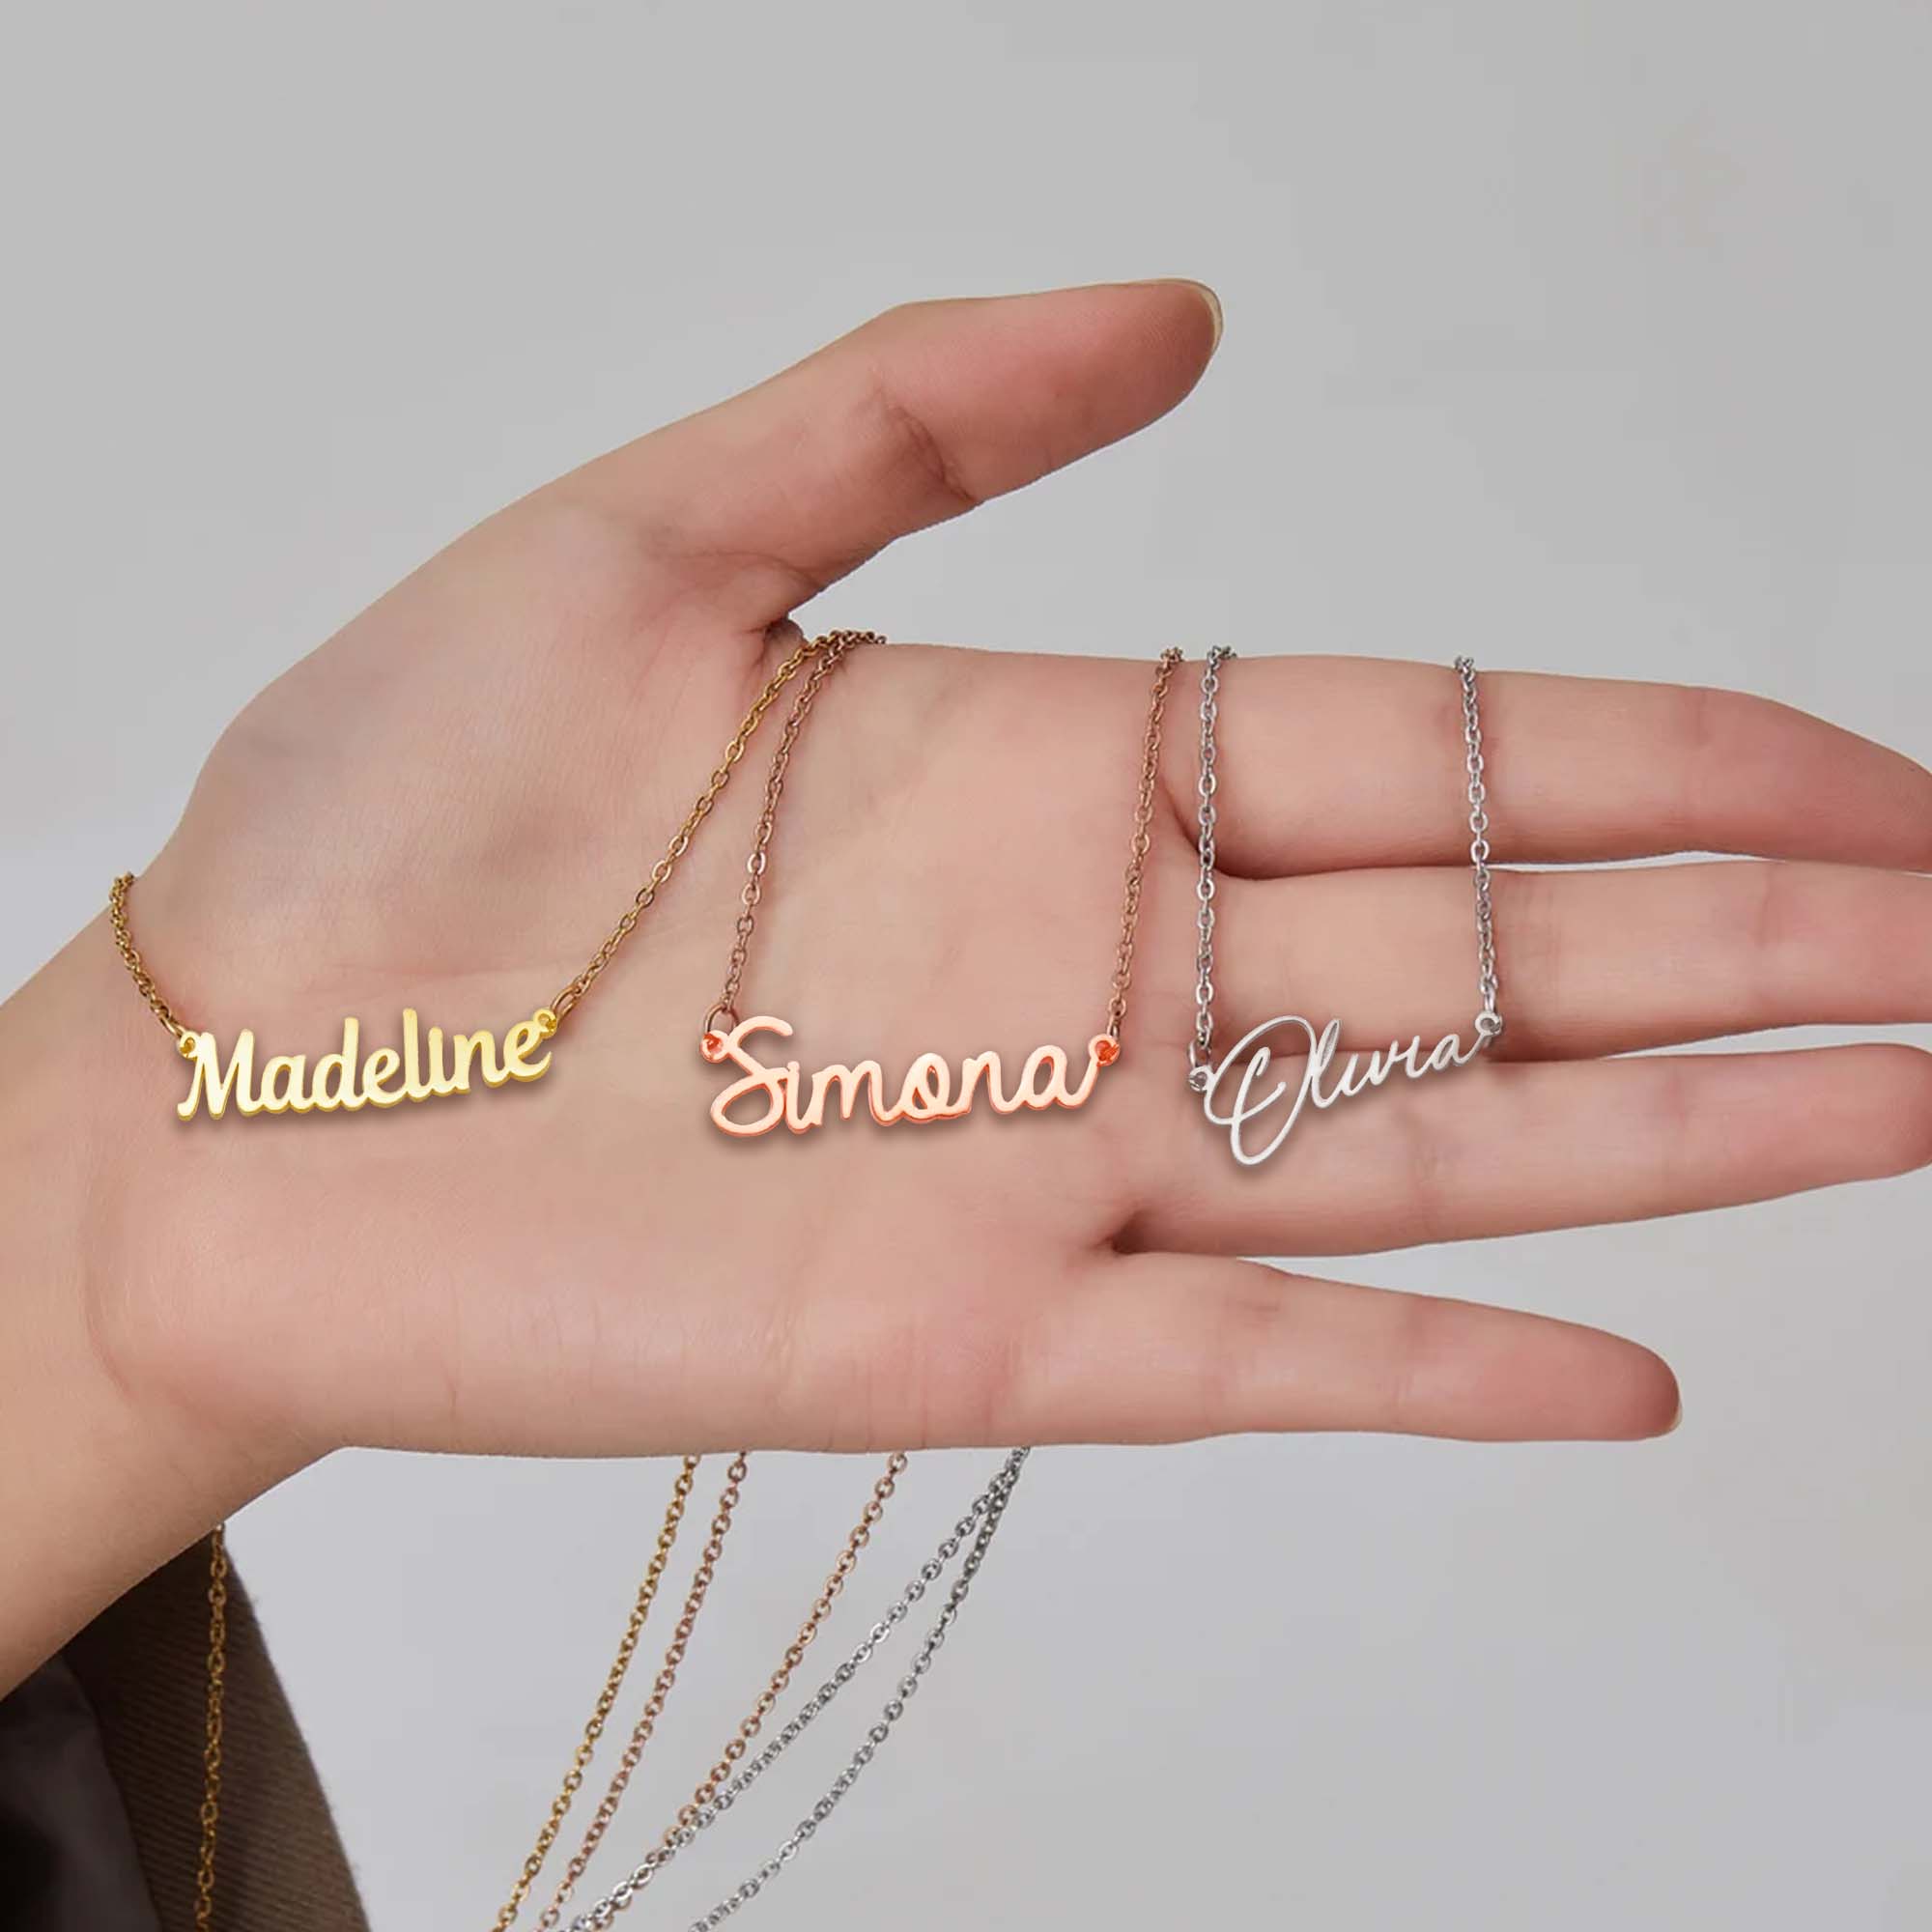 Custom Name - Personalized Daughter Name Necklace